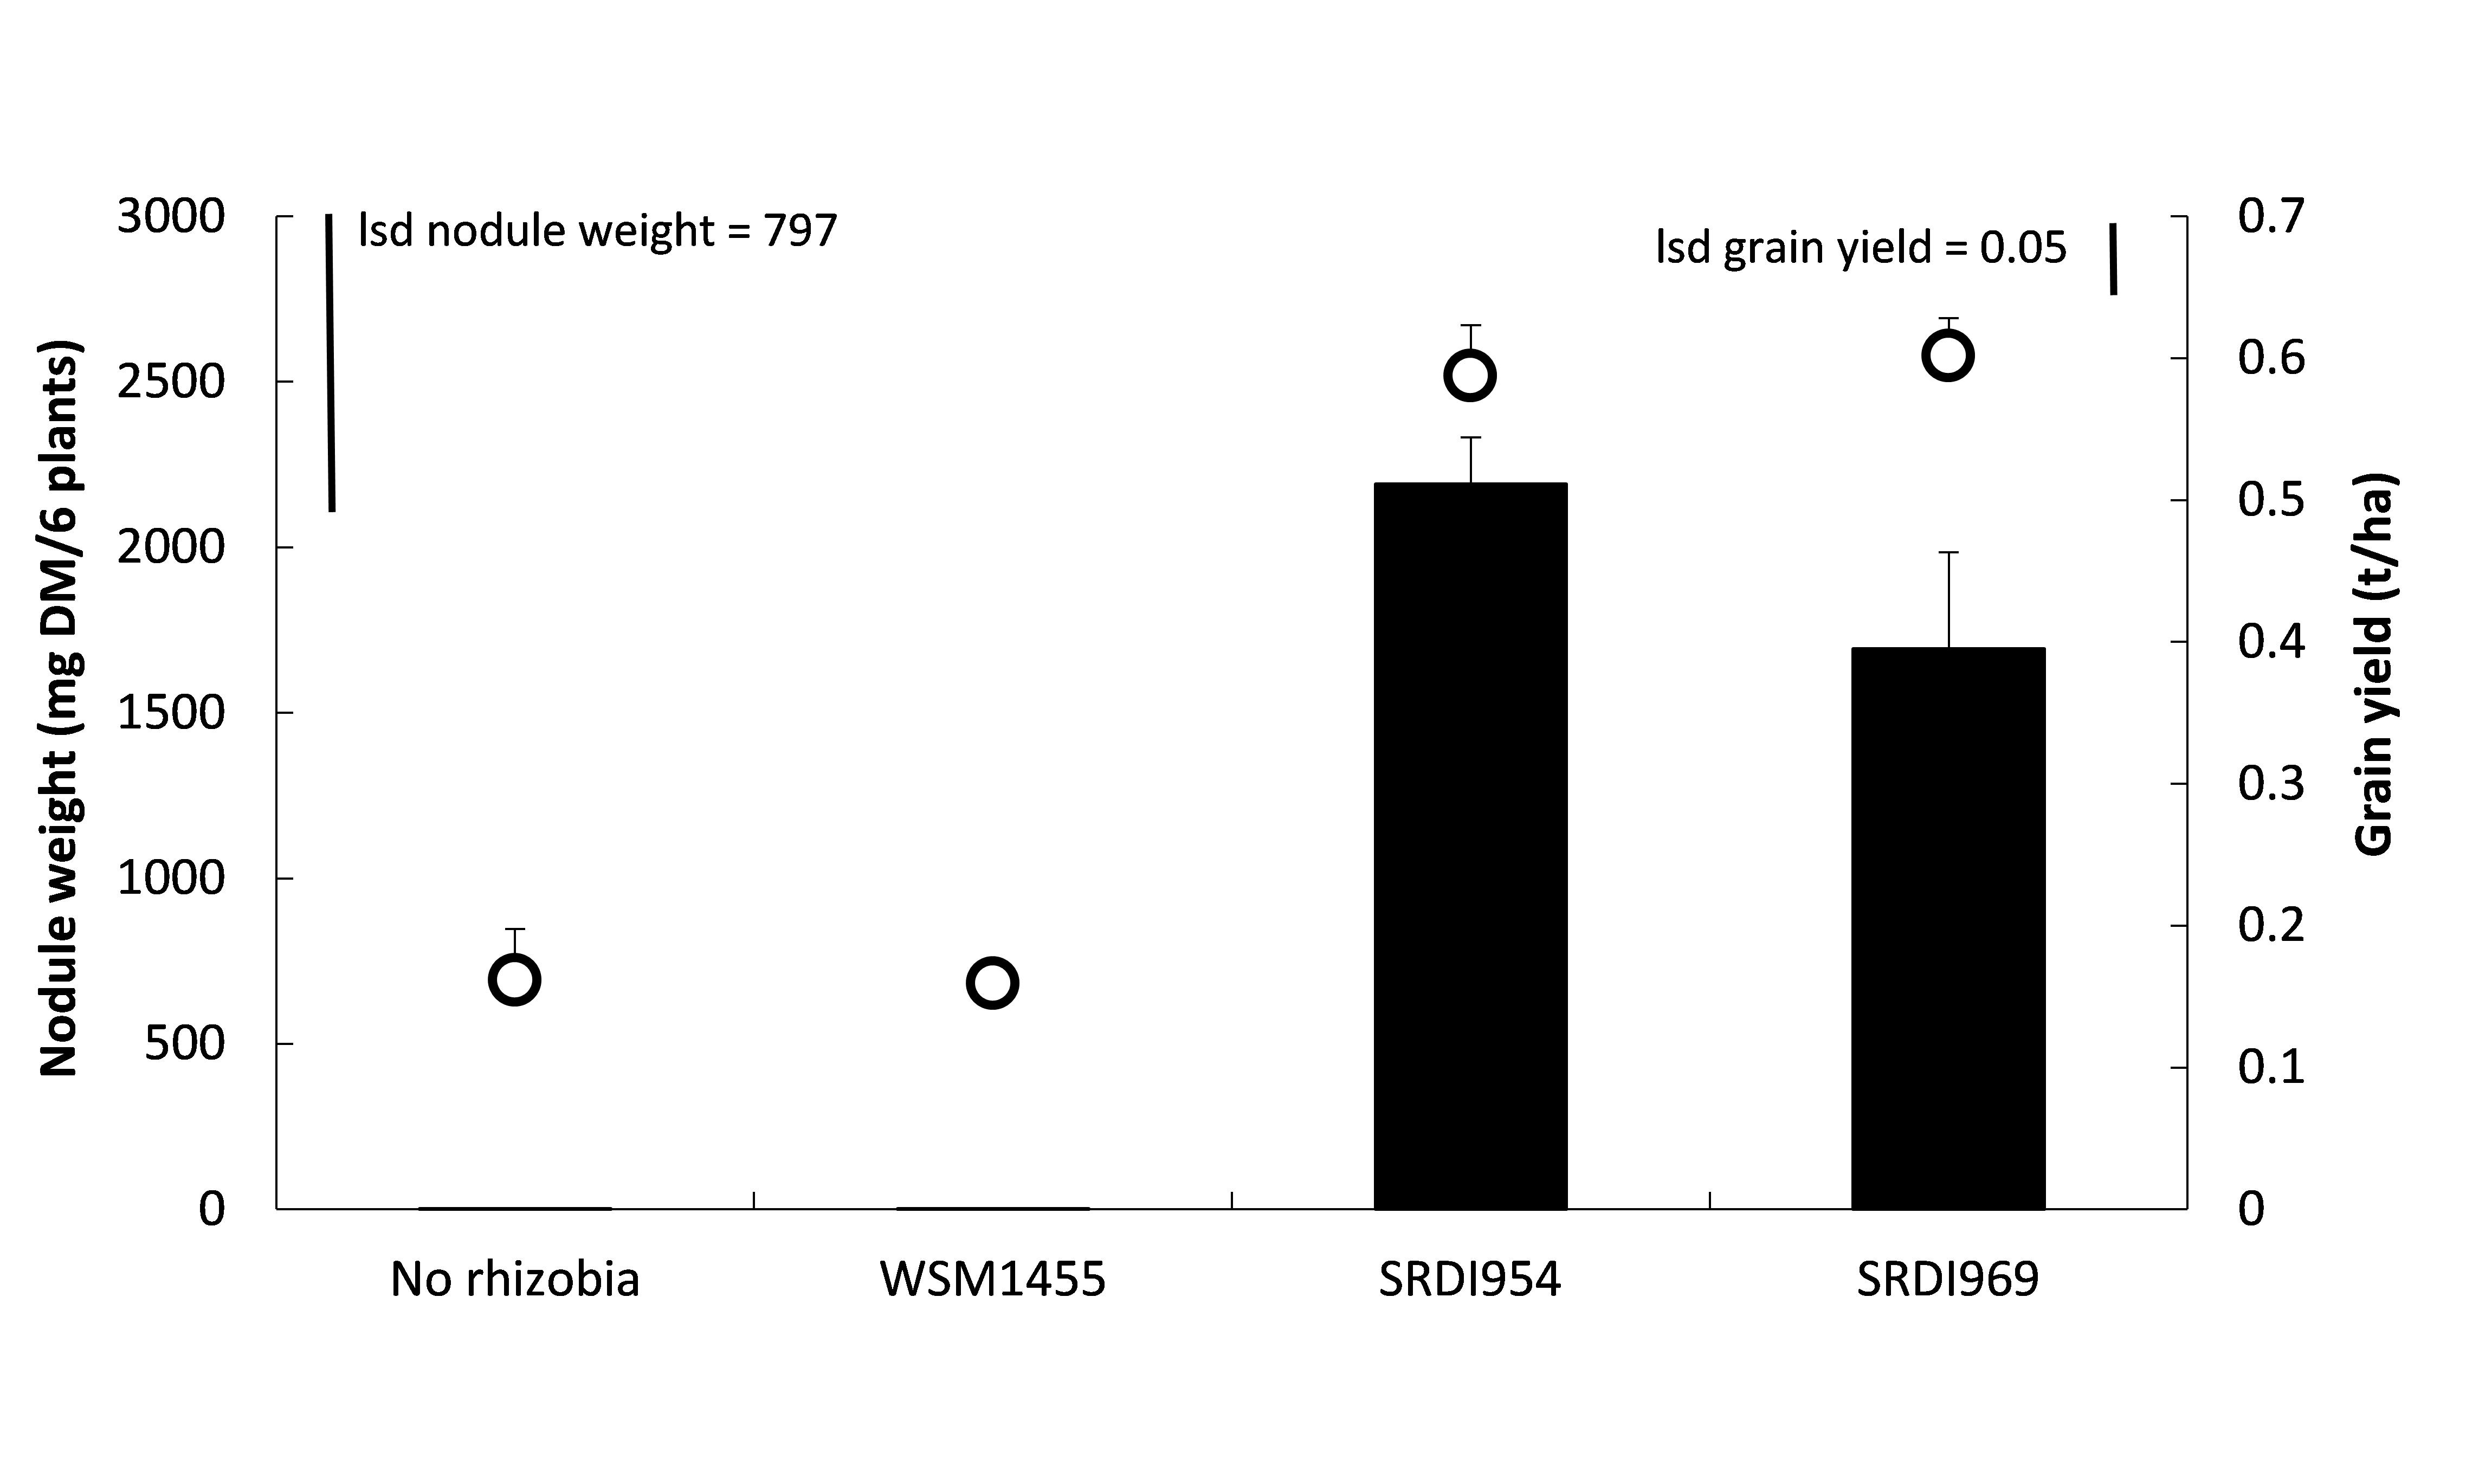 With faba bean at Wanilla (Eyre Peninsula, SA), rhizobia strains SRDI-954 and SRDI-969 outperformed WSM-1455 for both nodulation and grain yield, when applied to seed as a peat slurry at the standard rate of inoculation.